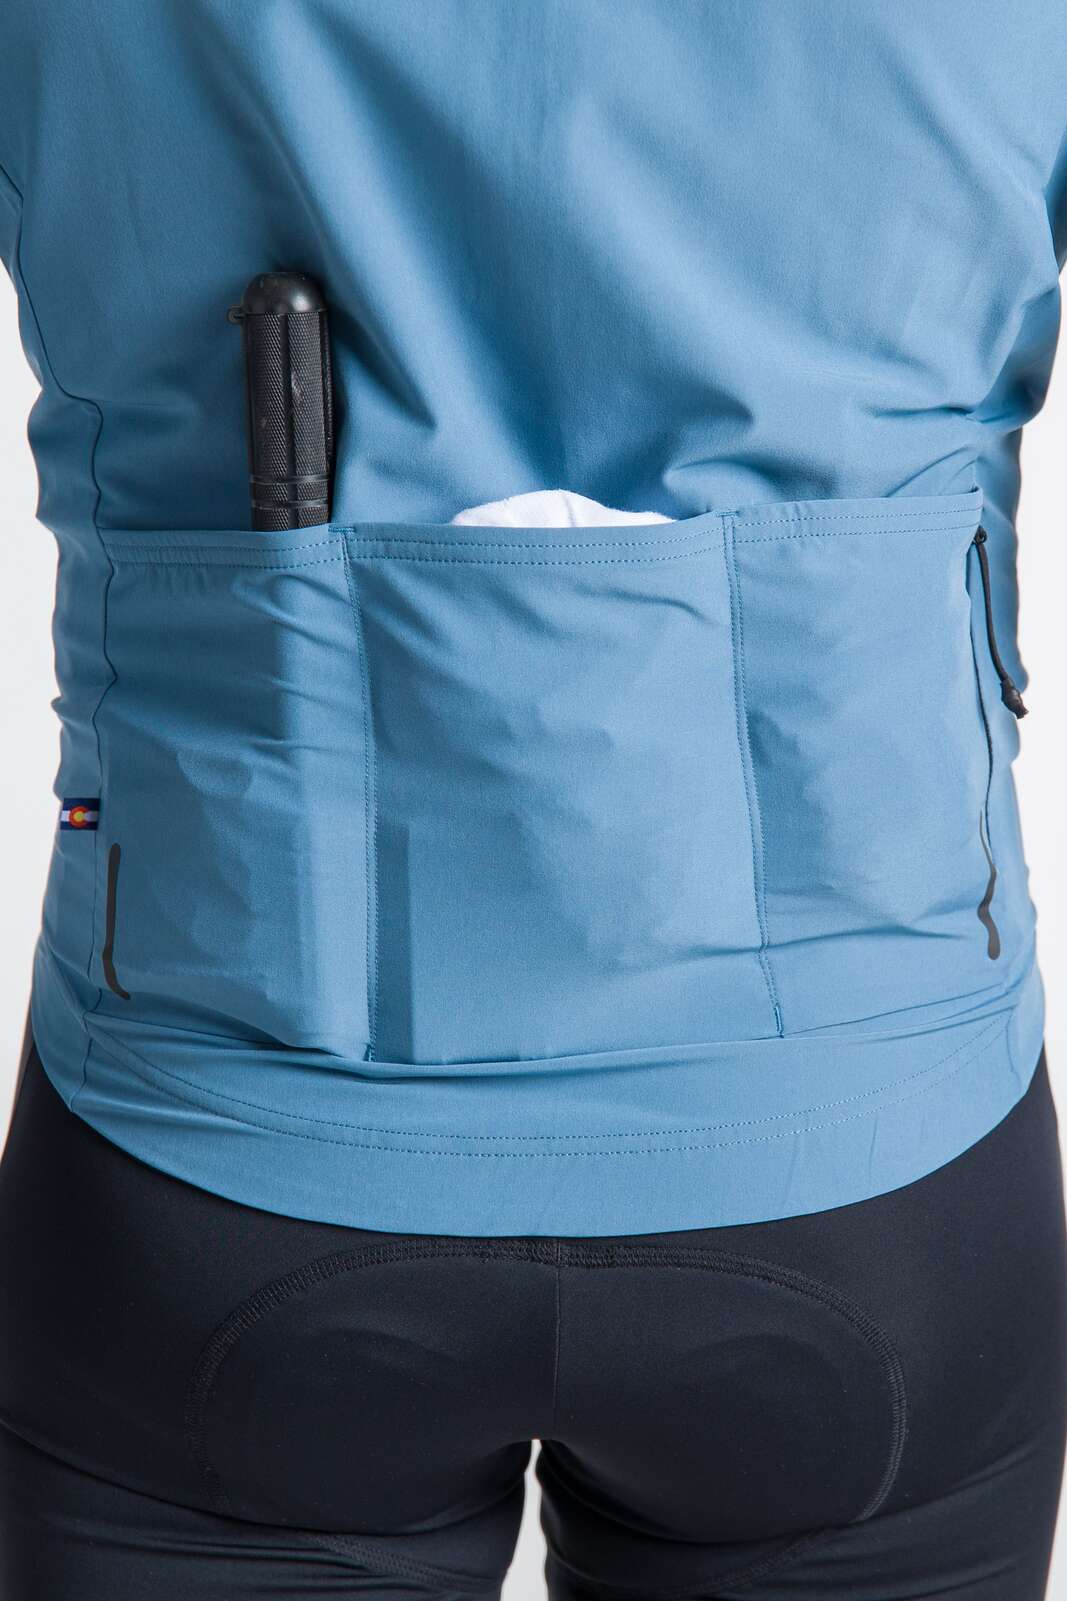 Men's Blue Packable Cycling Jacket - Summit Shell Back Pockets